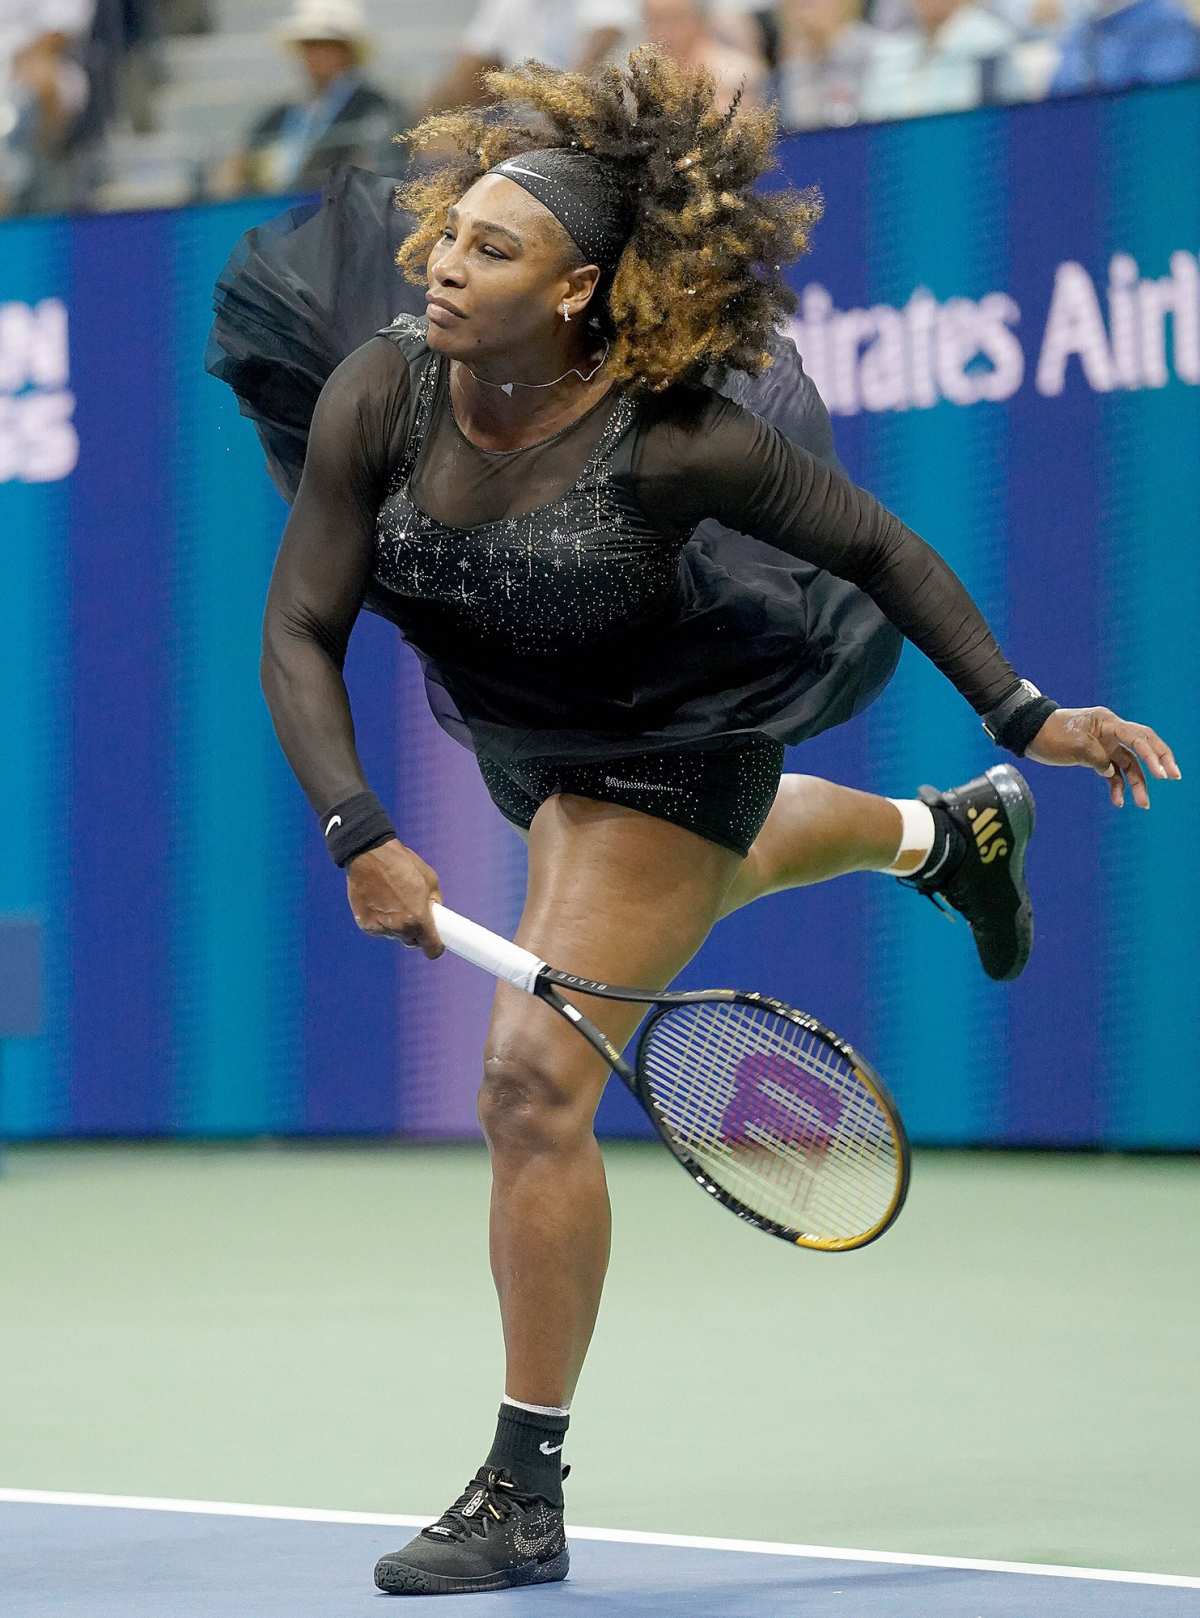 Serena Williams' Best On-Court Tennis Fashion Moments: Pics